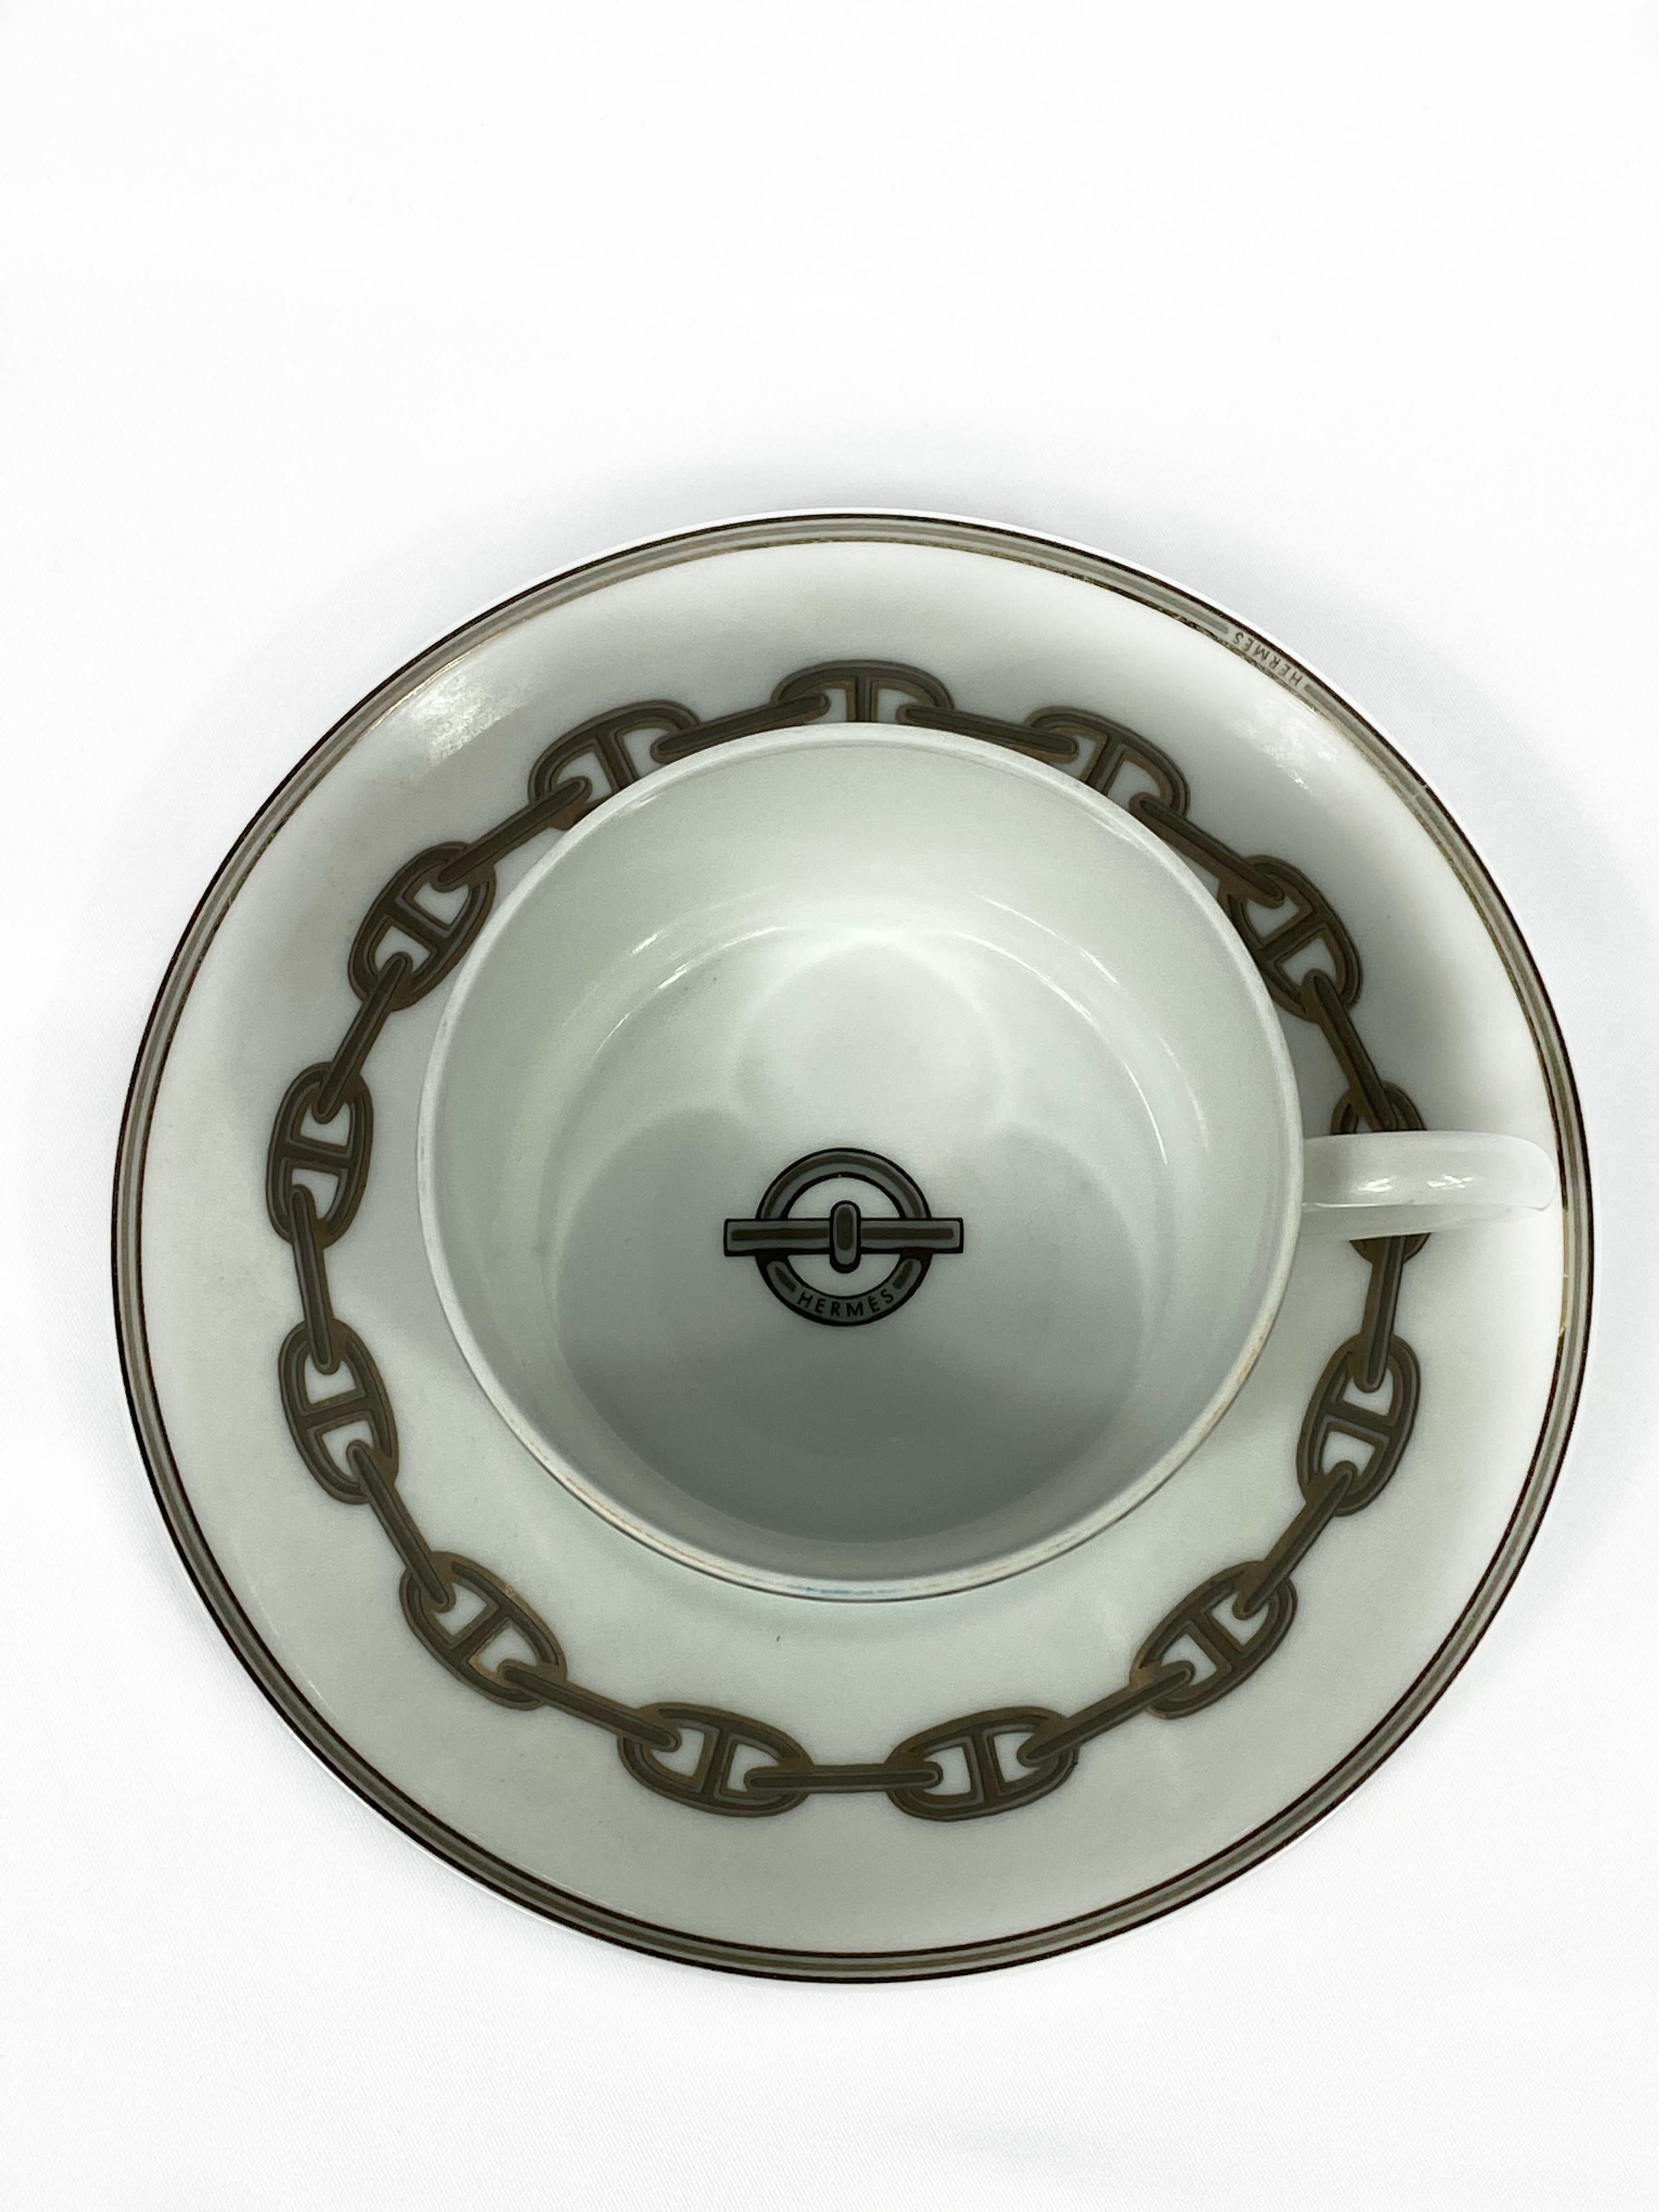 HERMES Porcelain Dessert Setting D'Ancre Chaine in Grey Set of 6

Product details:
Set of 6 (total of 18 pieces) :
6 cups, 6 cup plates and 6 dessert plates 
Porcelain
Signed by Hermes (every piece)
Featuring the signature chain link print
The cup